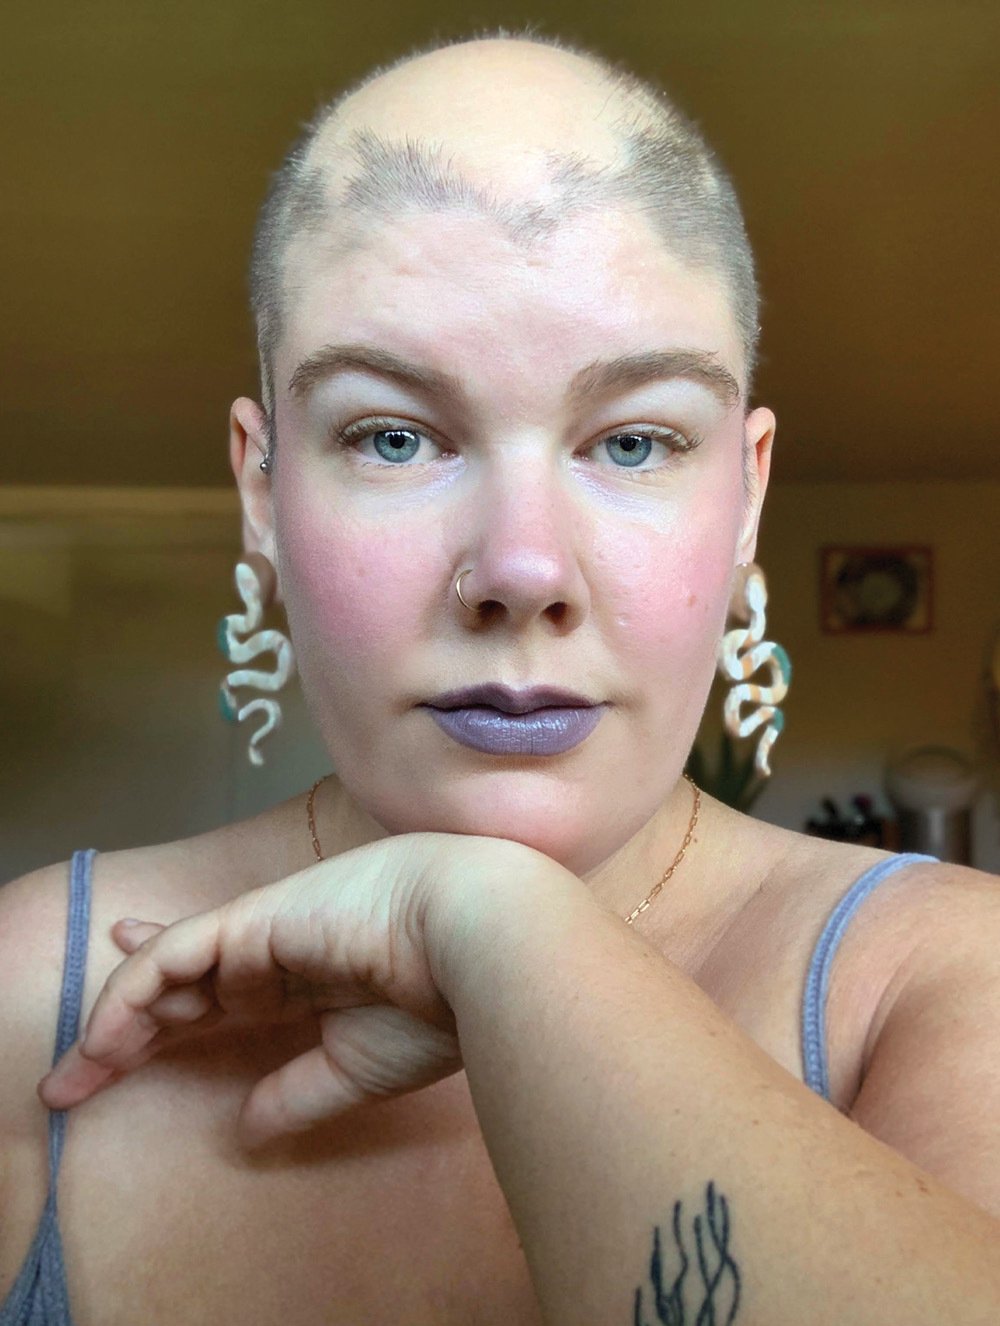 A photo of Brianne Cail after she shaved her head following her experience with alopecia areata.